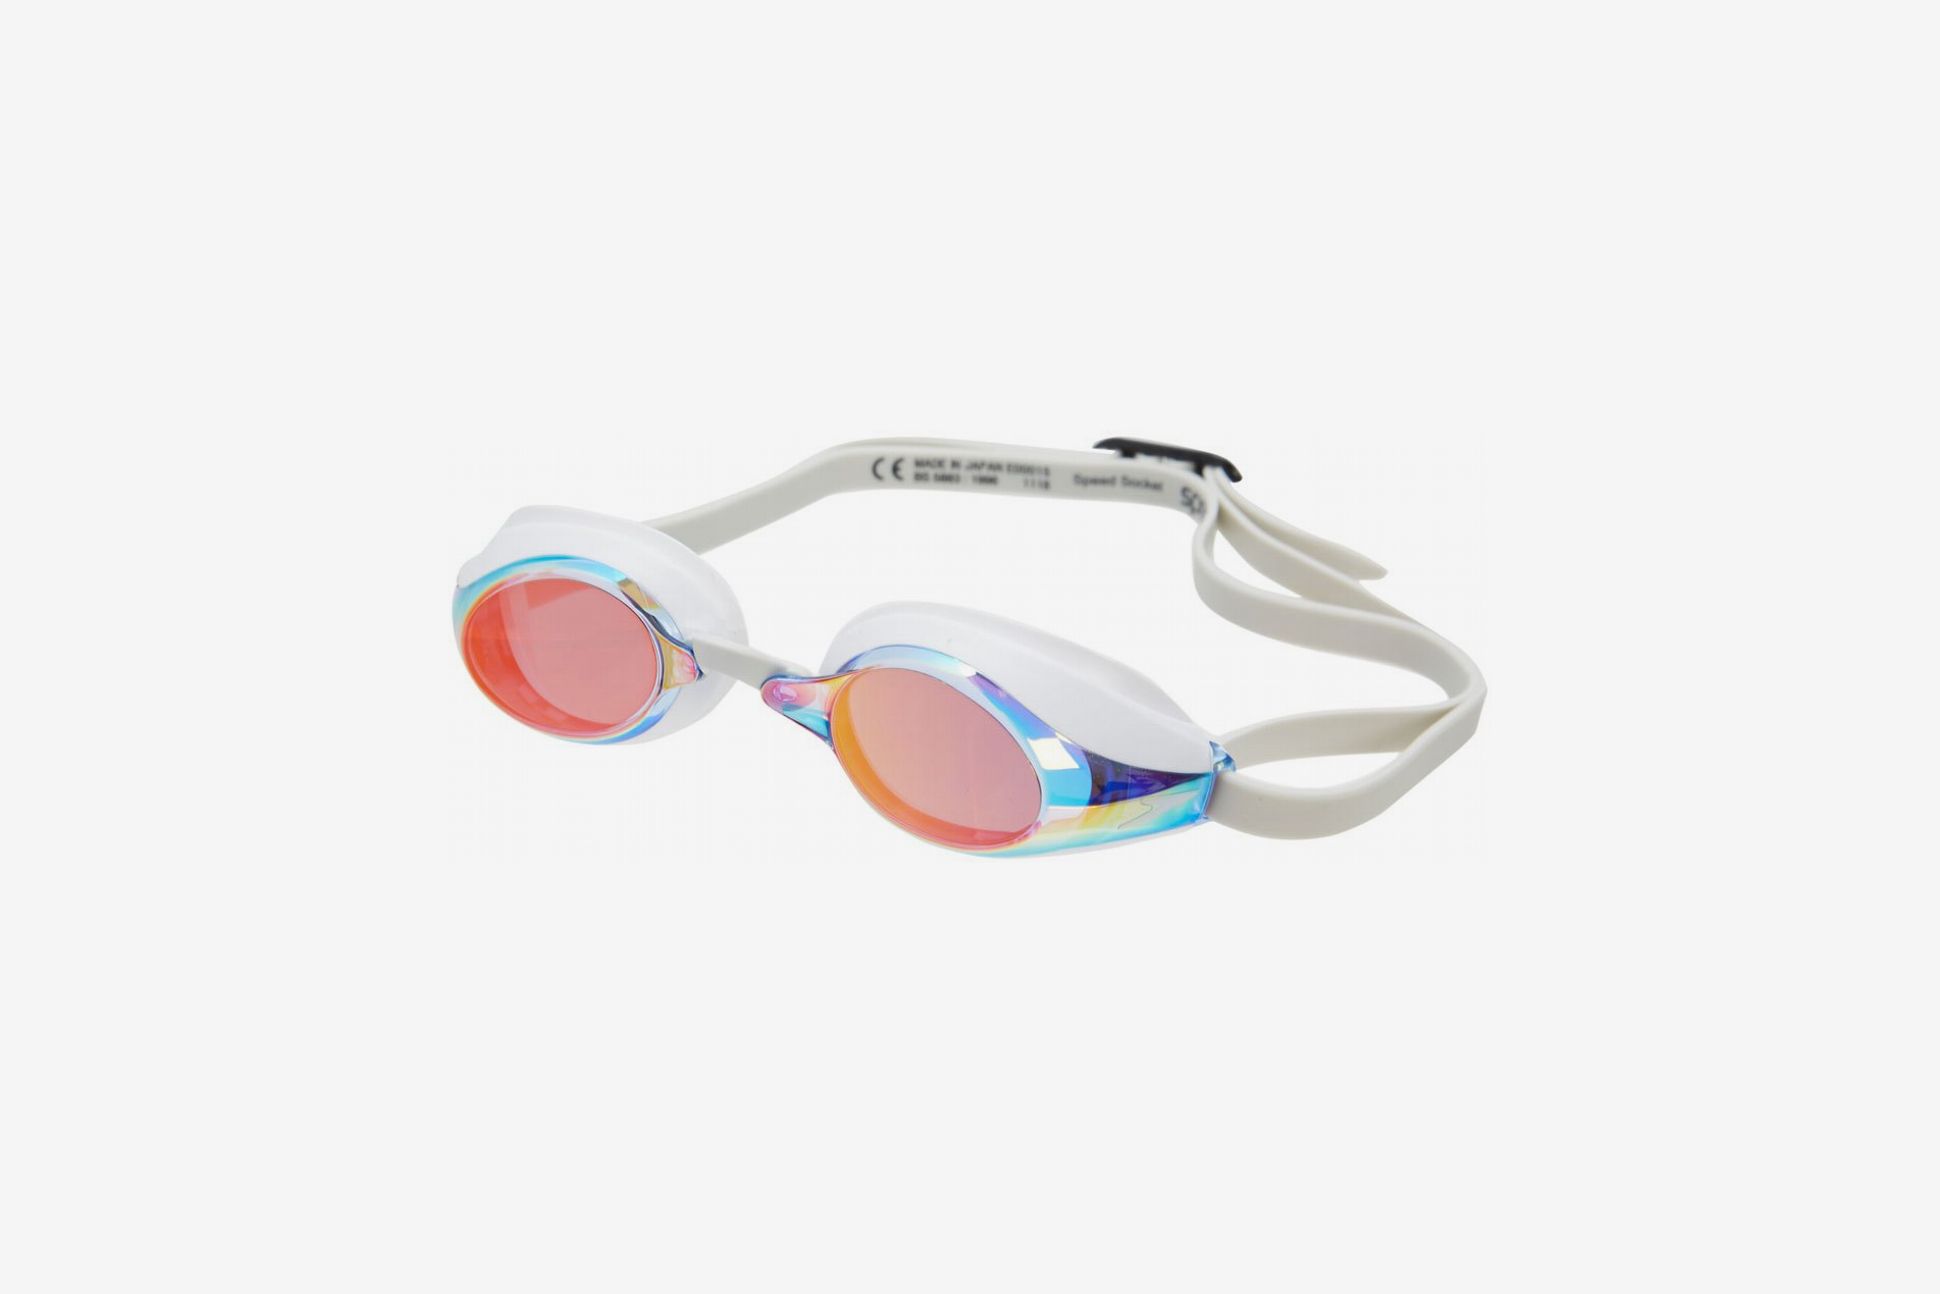 Anti-fog Swim Goggles Details about   Speedo Adult Swim Goggles 3 Pack Ages 14 